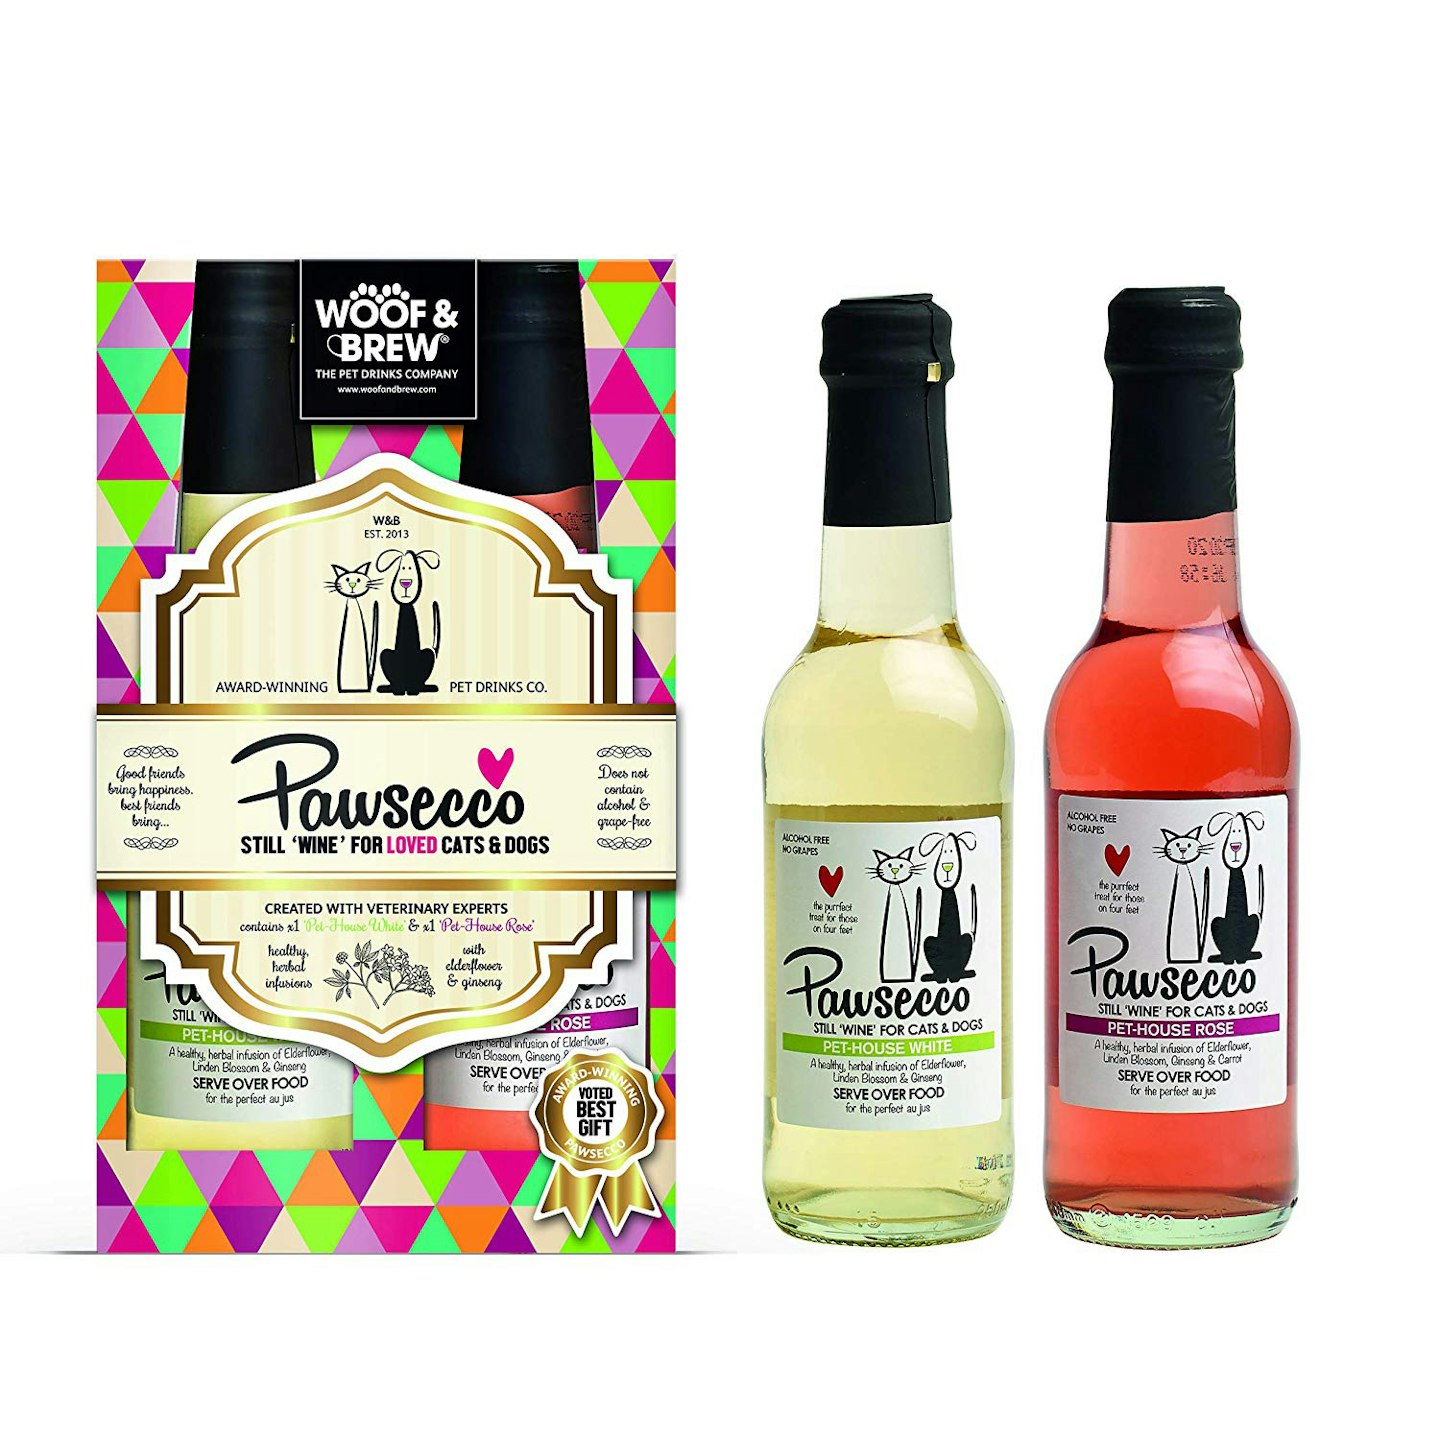 Woof & Brew Pawsecco Still u2018White Wine’ for Dogs and Cats